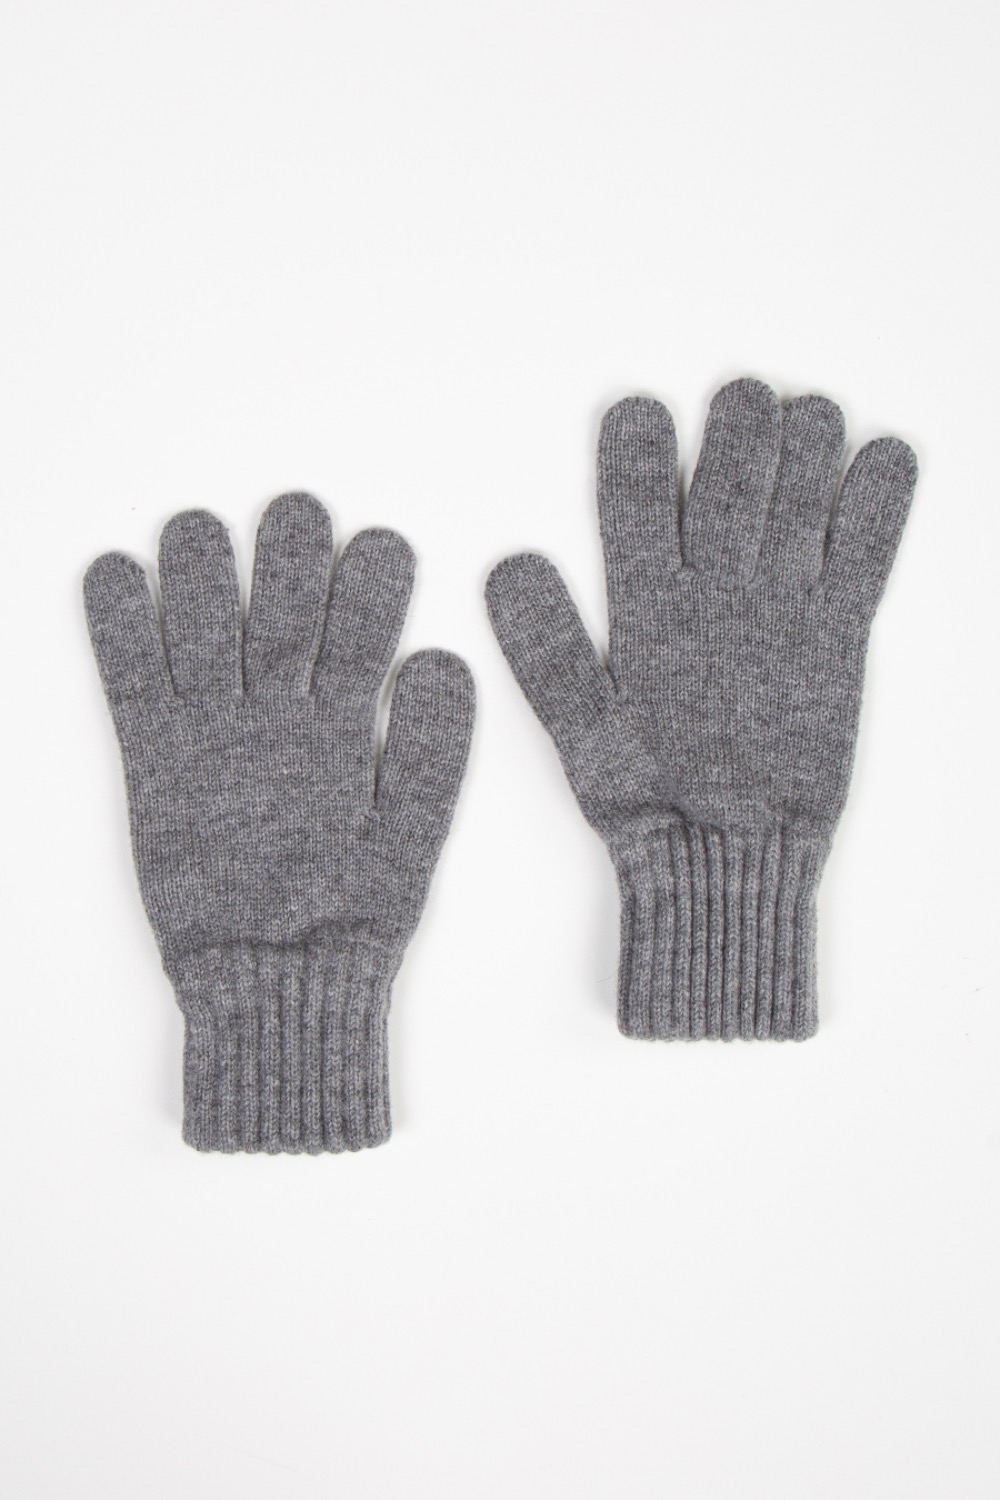 (CARRY OVER) DARK GREY LAMBSWOOL KNITTED GLOVES